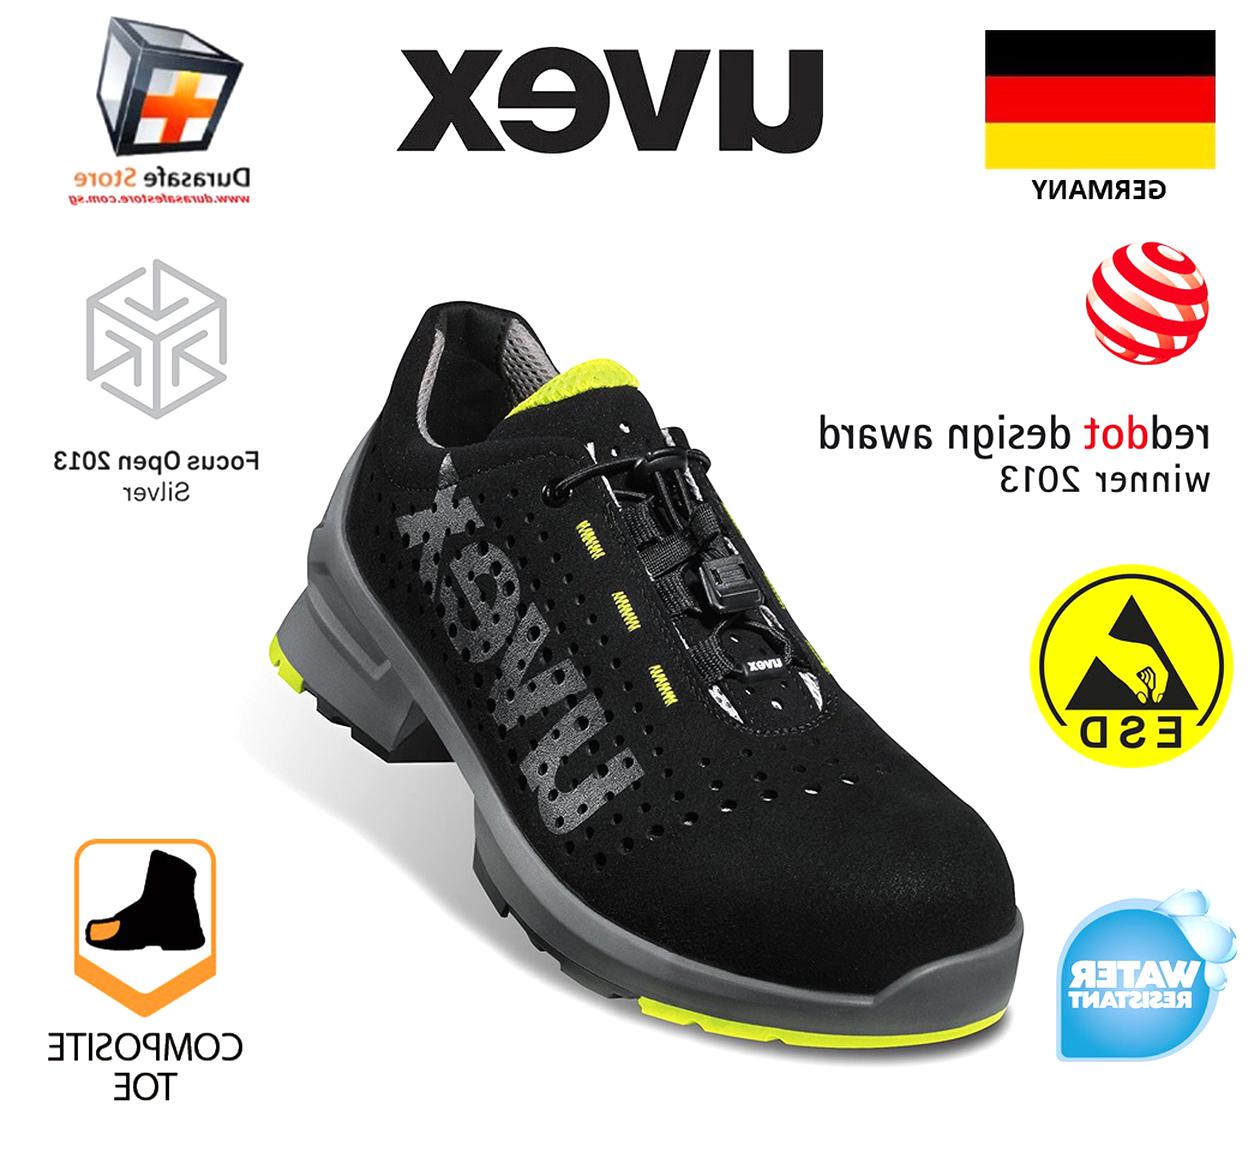 uvex safety trainers uk